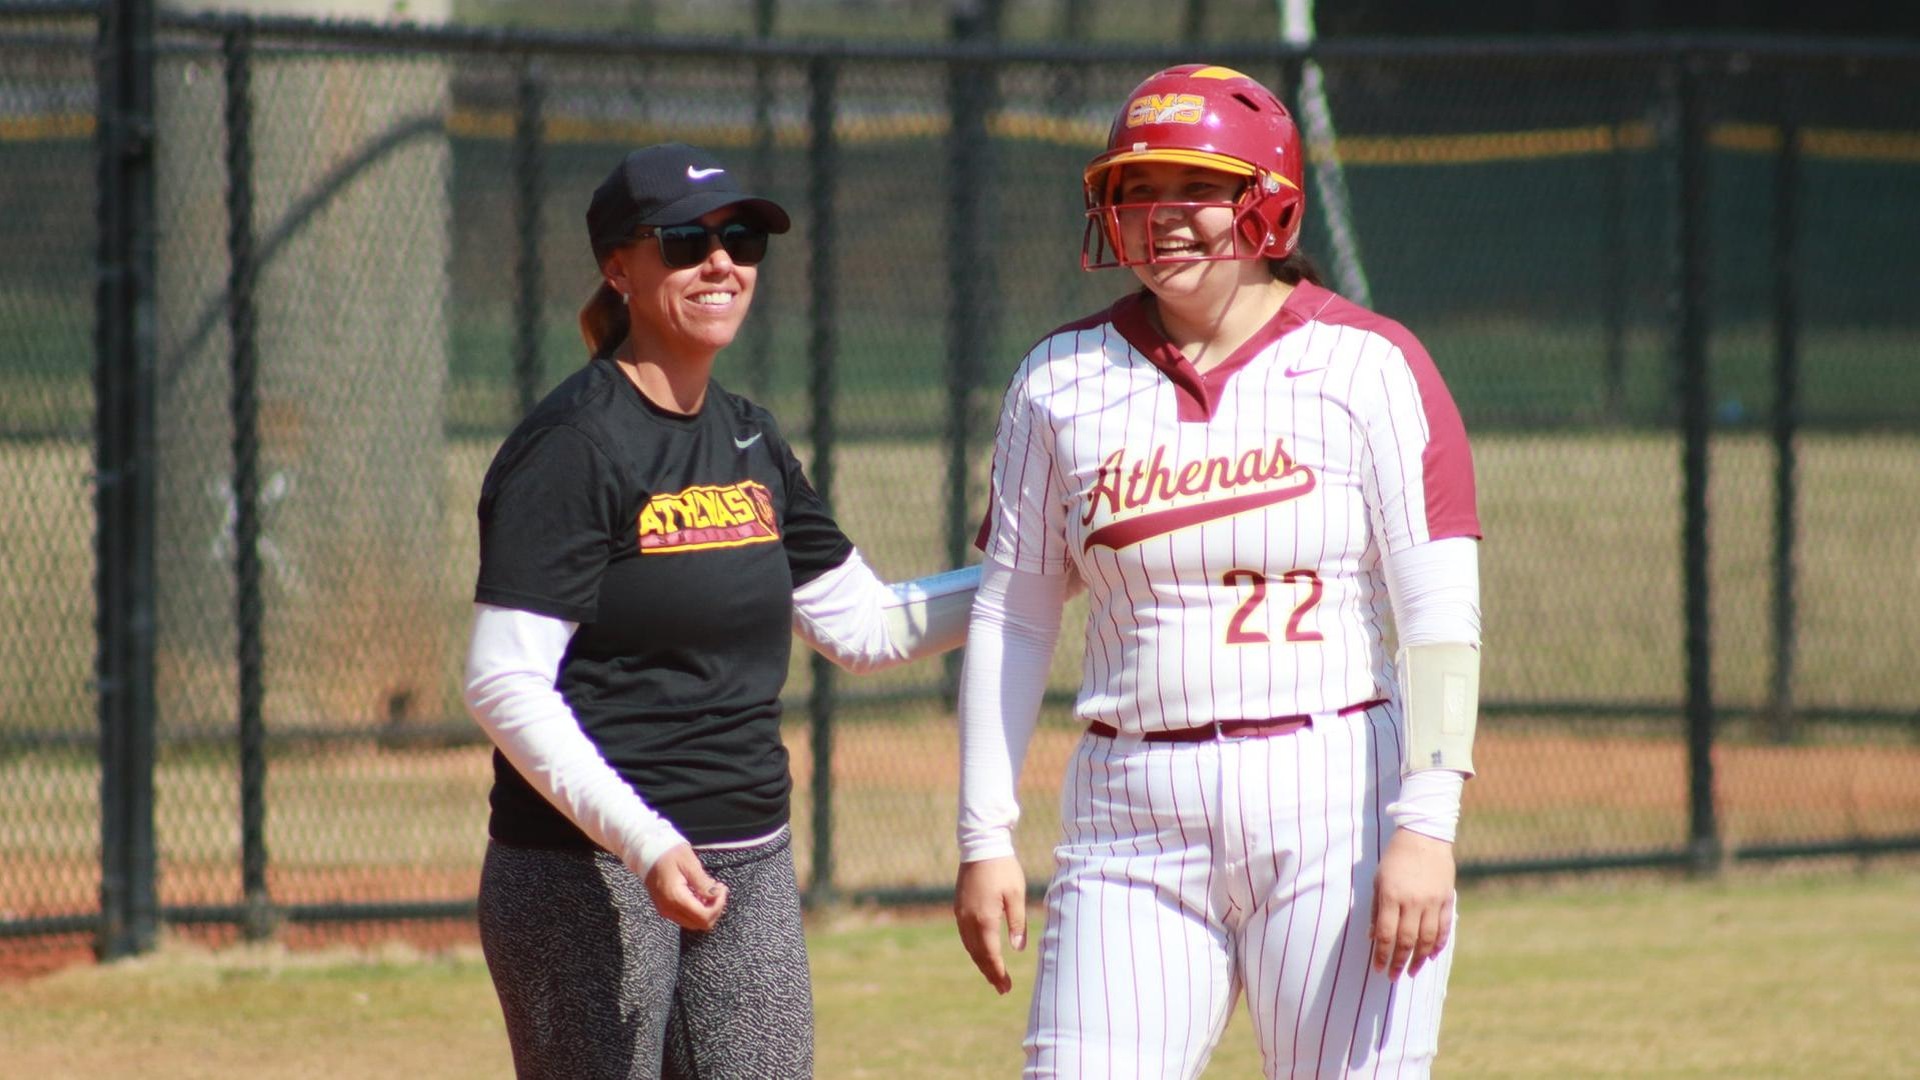 Madison Gonzalez hit her first career homer against St. John Fisher (photo courtesy of NFCA)